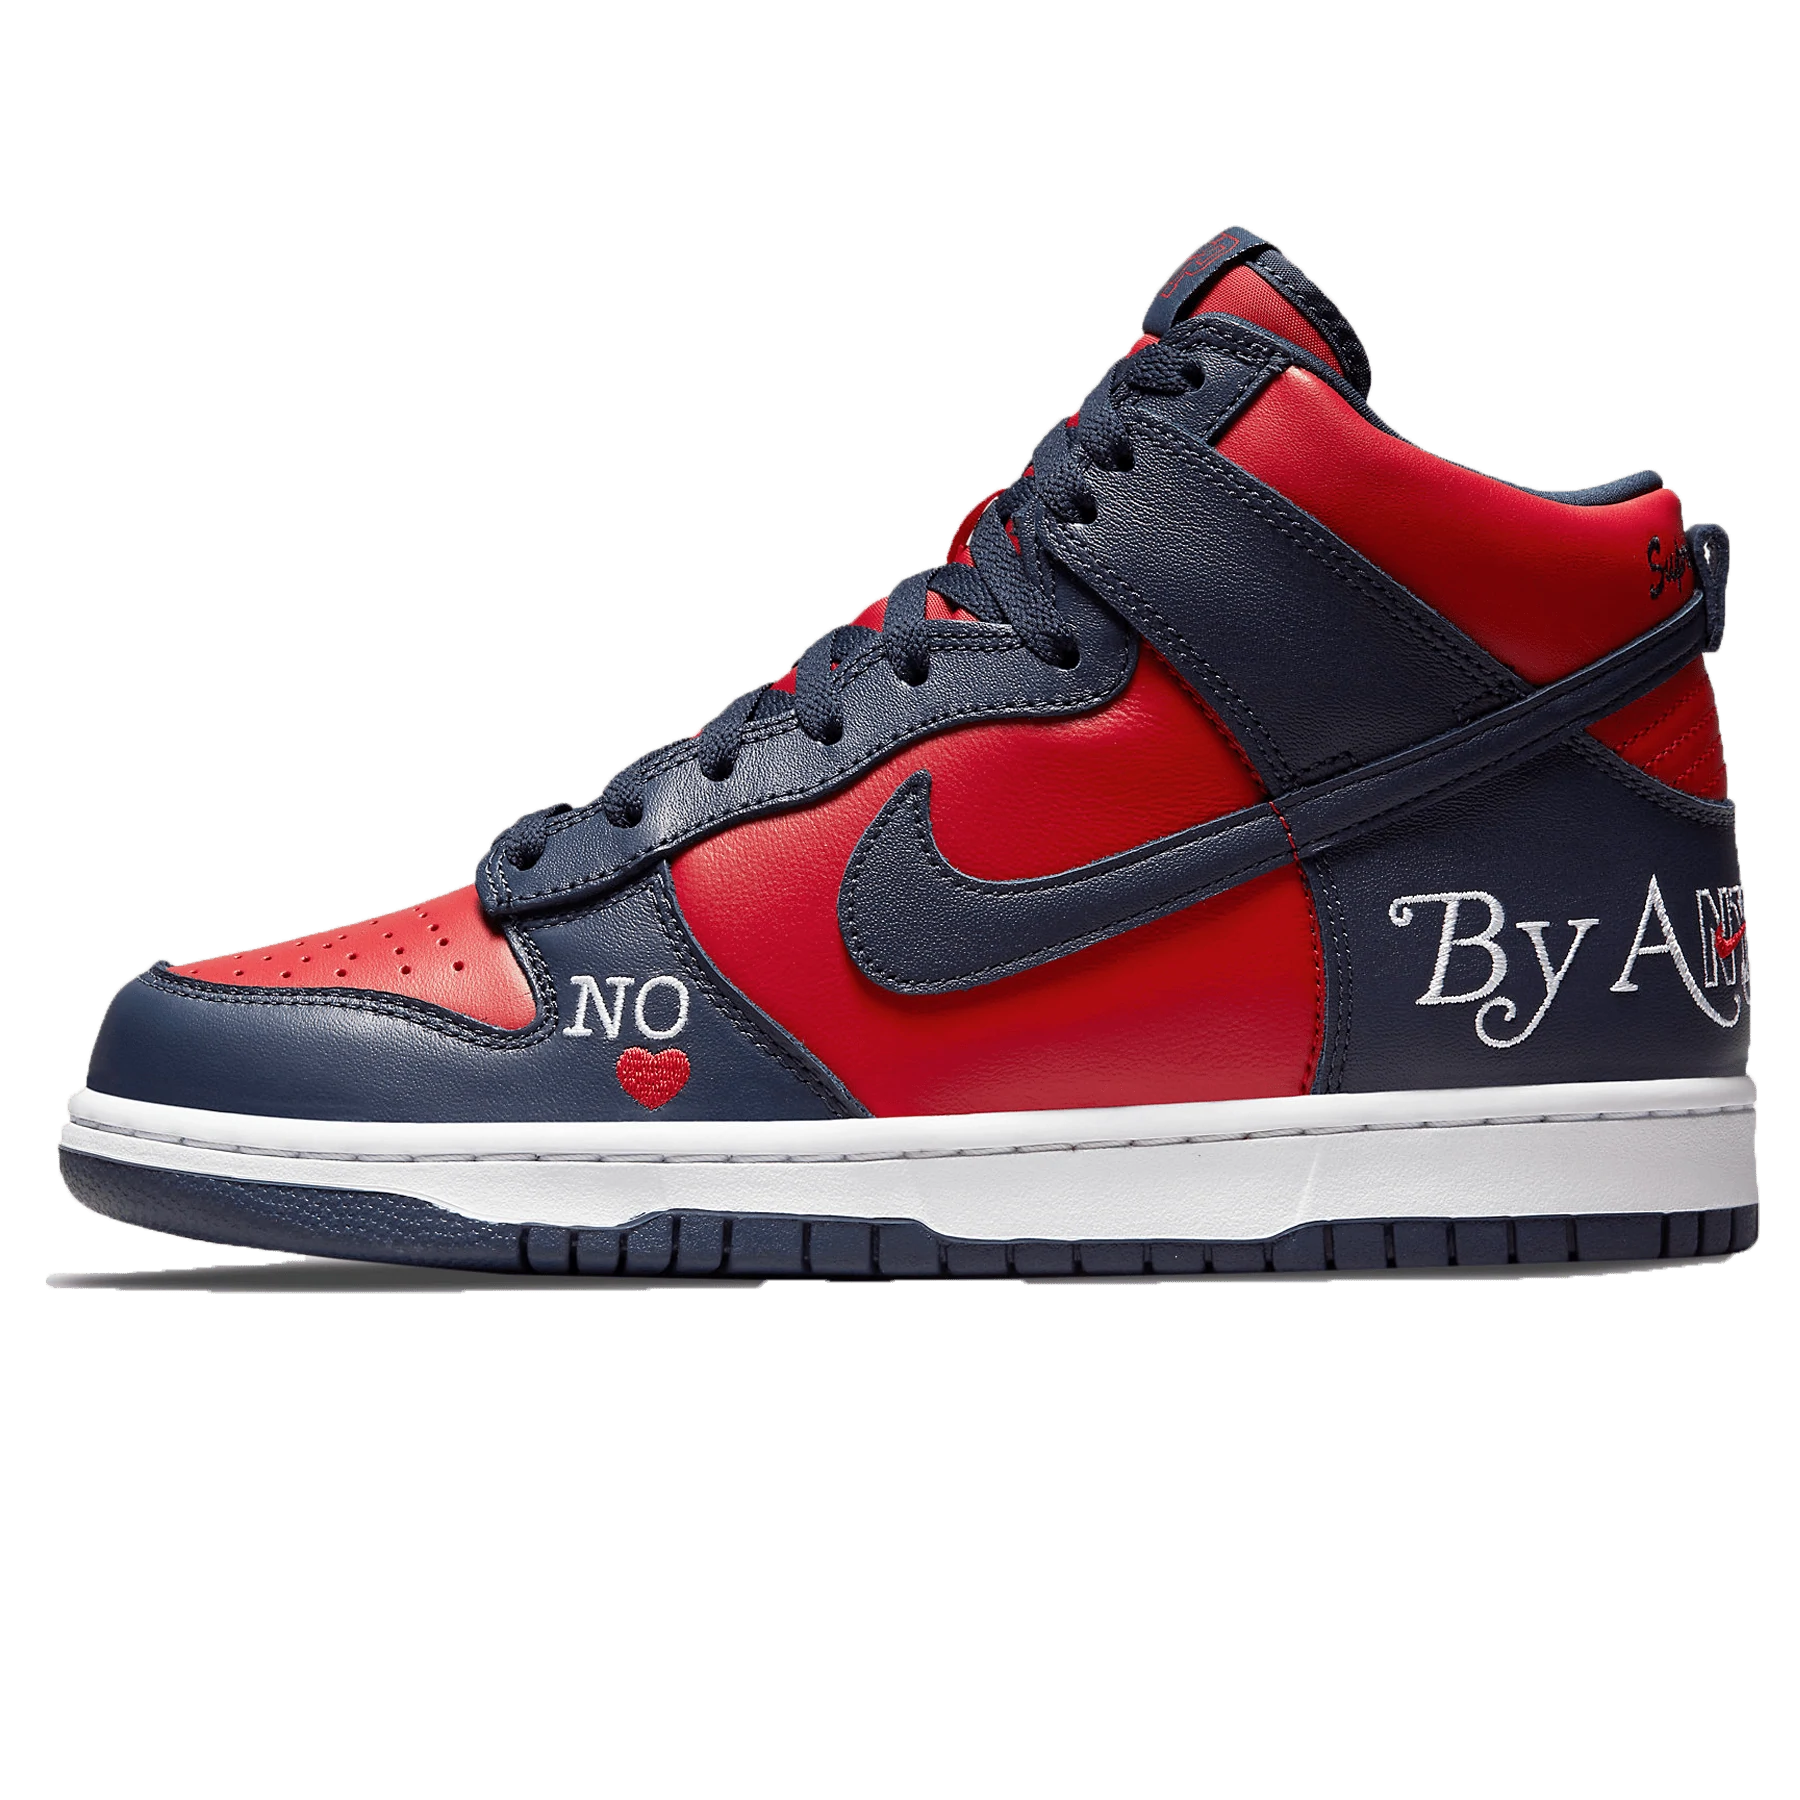 Nike SB x Supreme Dunk High 'By Any Means Navy Red'